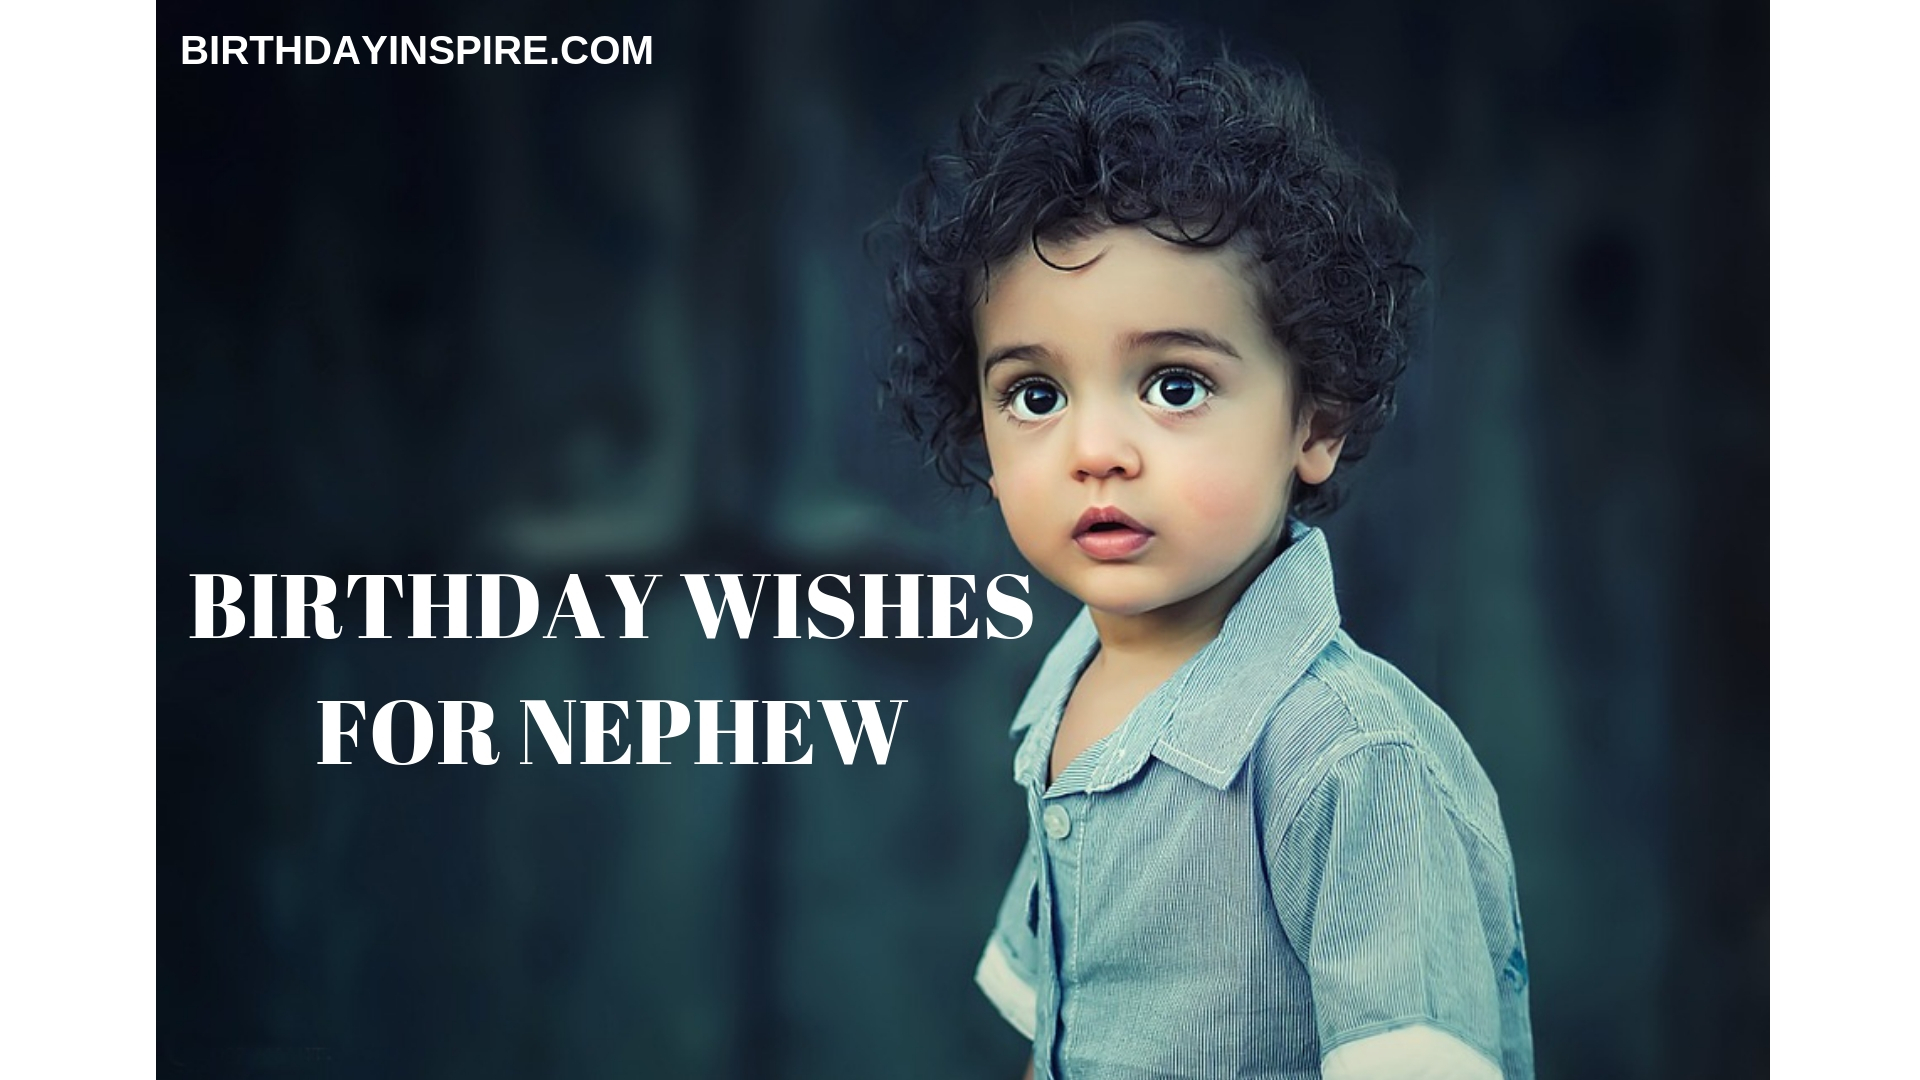 BIRTHDAY WISHES FOR NEPHEW FROM AUNT